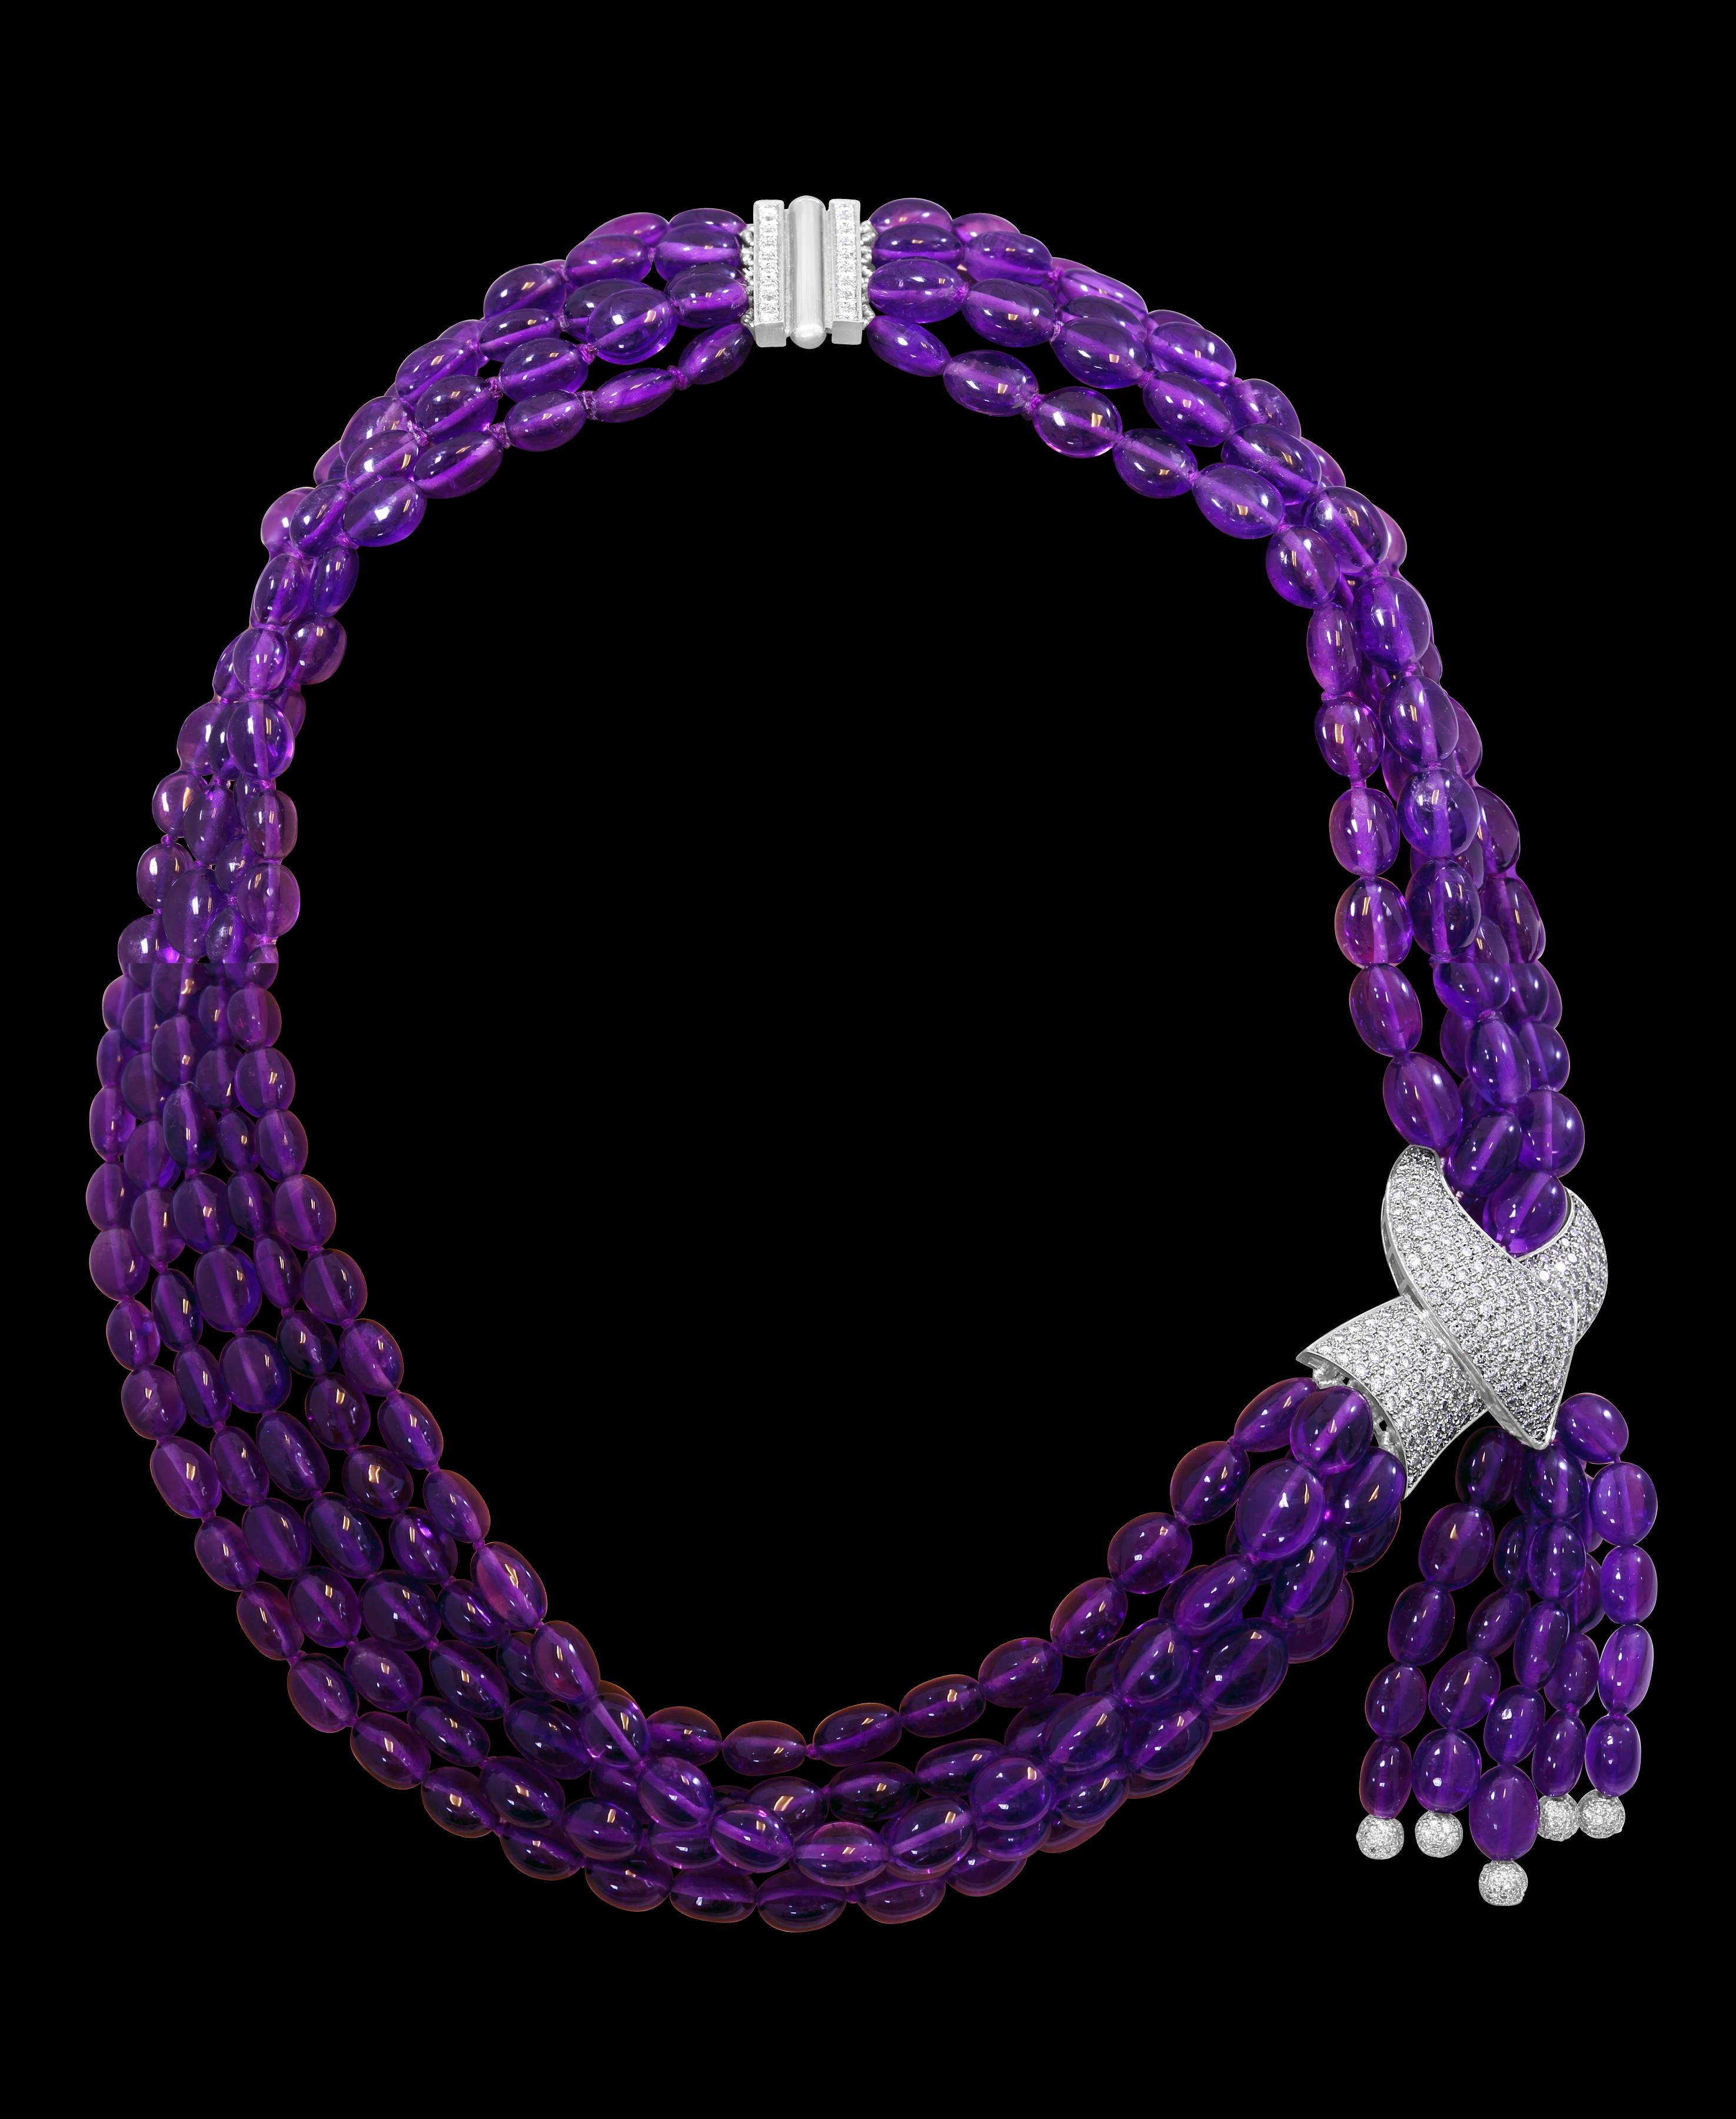  Natural Amethyst  Multi Layer Bead Necklace In Platinum  With  9 Carats of  fine Quality Diamonds
5 layers of Natural Amethyst  Beads
Beautiful intense color 
All made in Platinum
Beautful dimaond clasp too in Platinum
All our jewelry comes with a